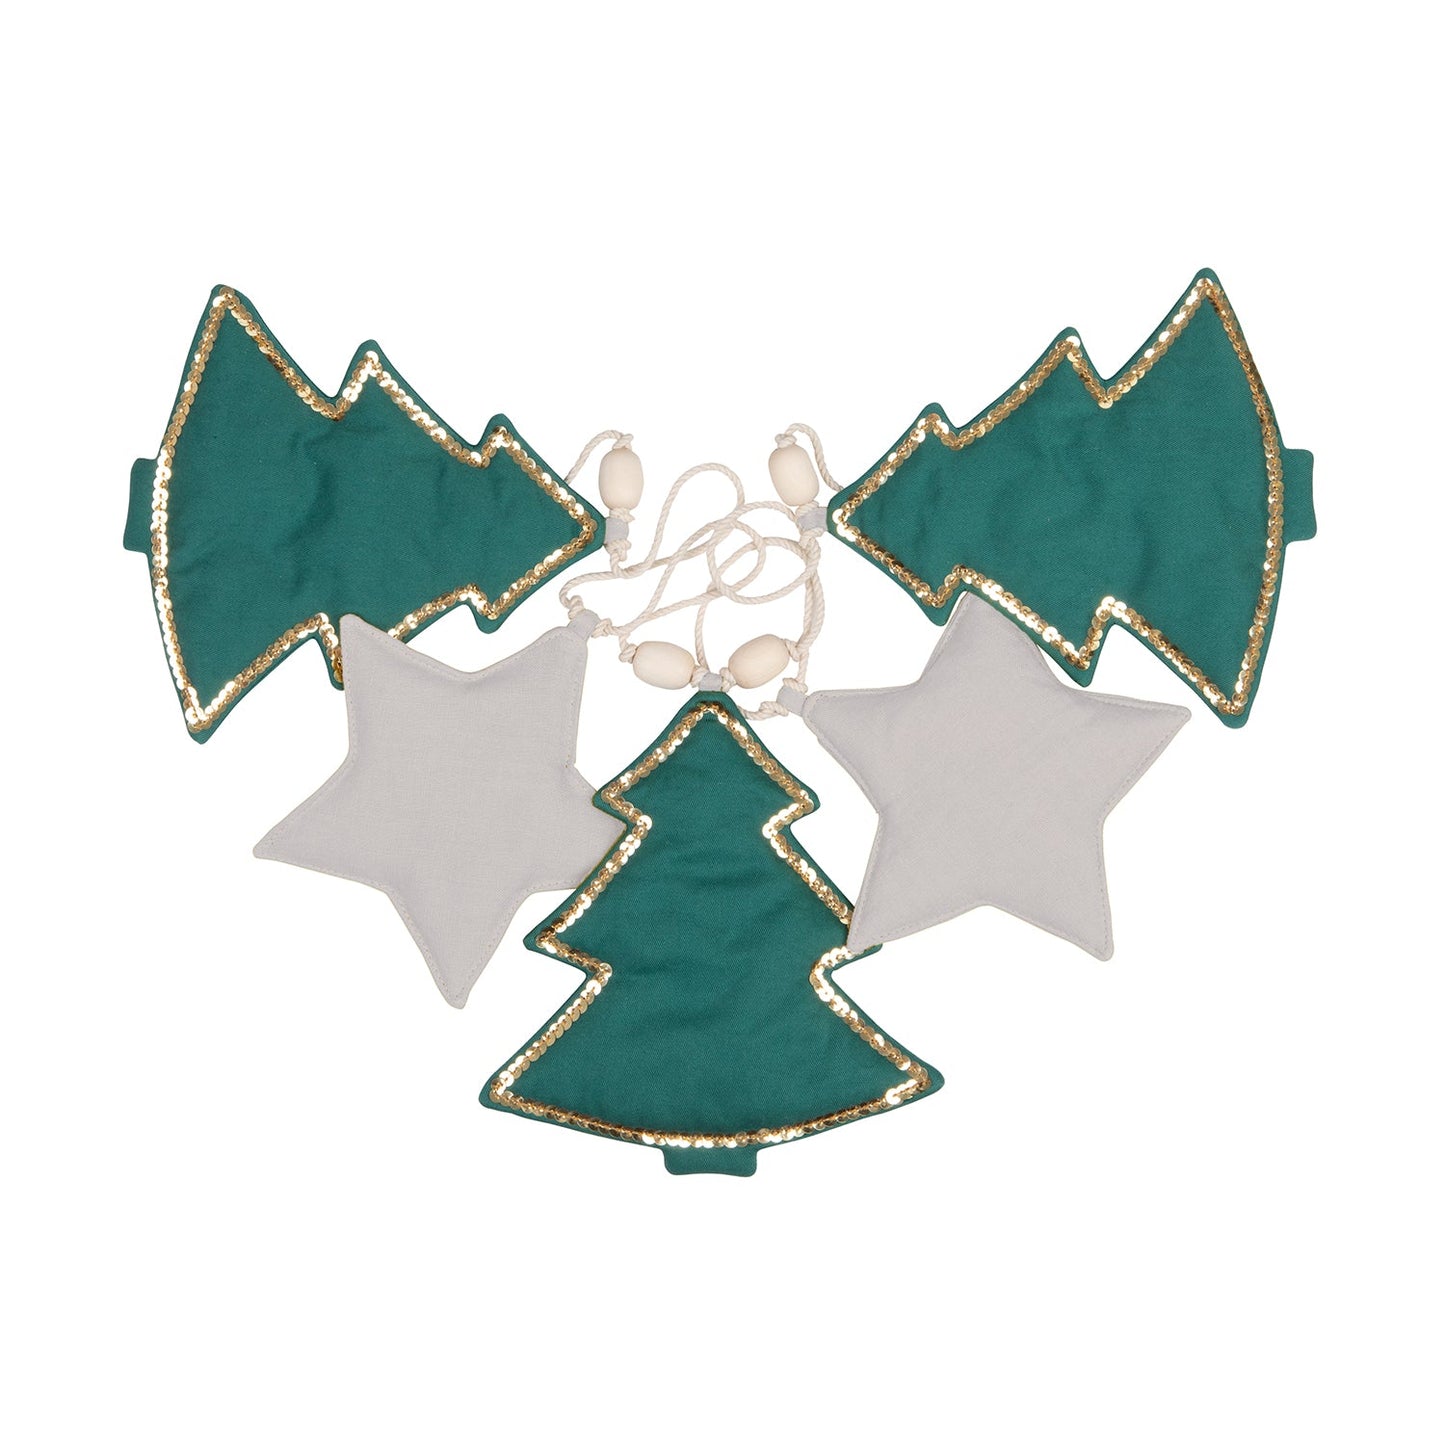 Cotton and Linen “Green Christmas Tree” Garland